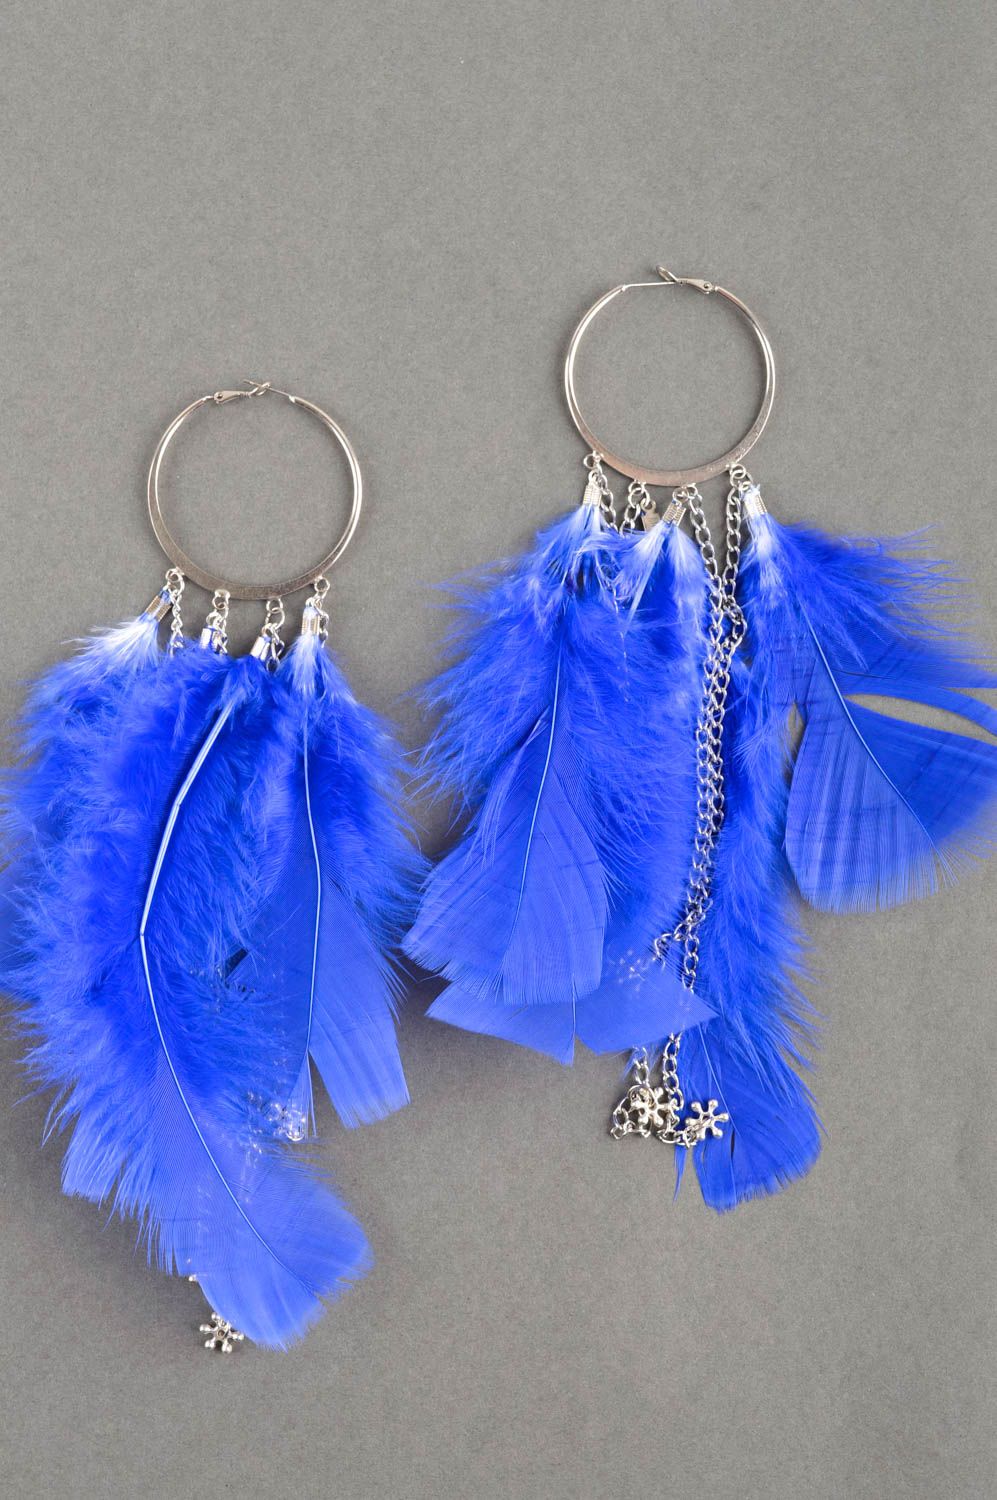 Handcrafted jewelry designer earrings feather earrings for girls cool gifts photo 1